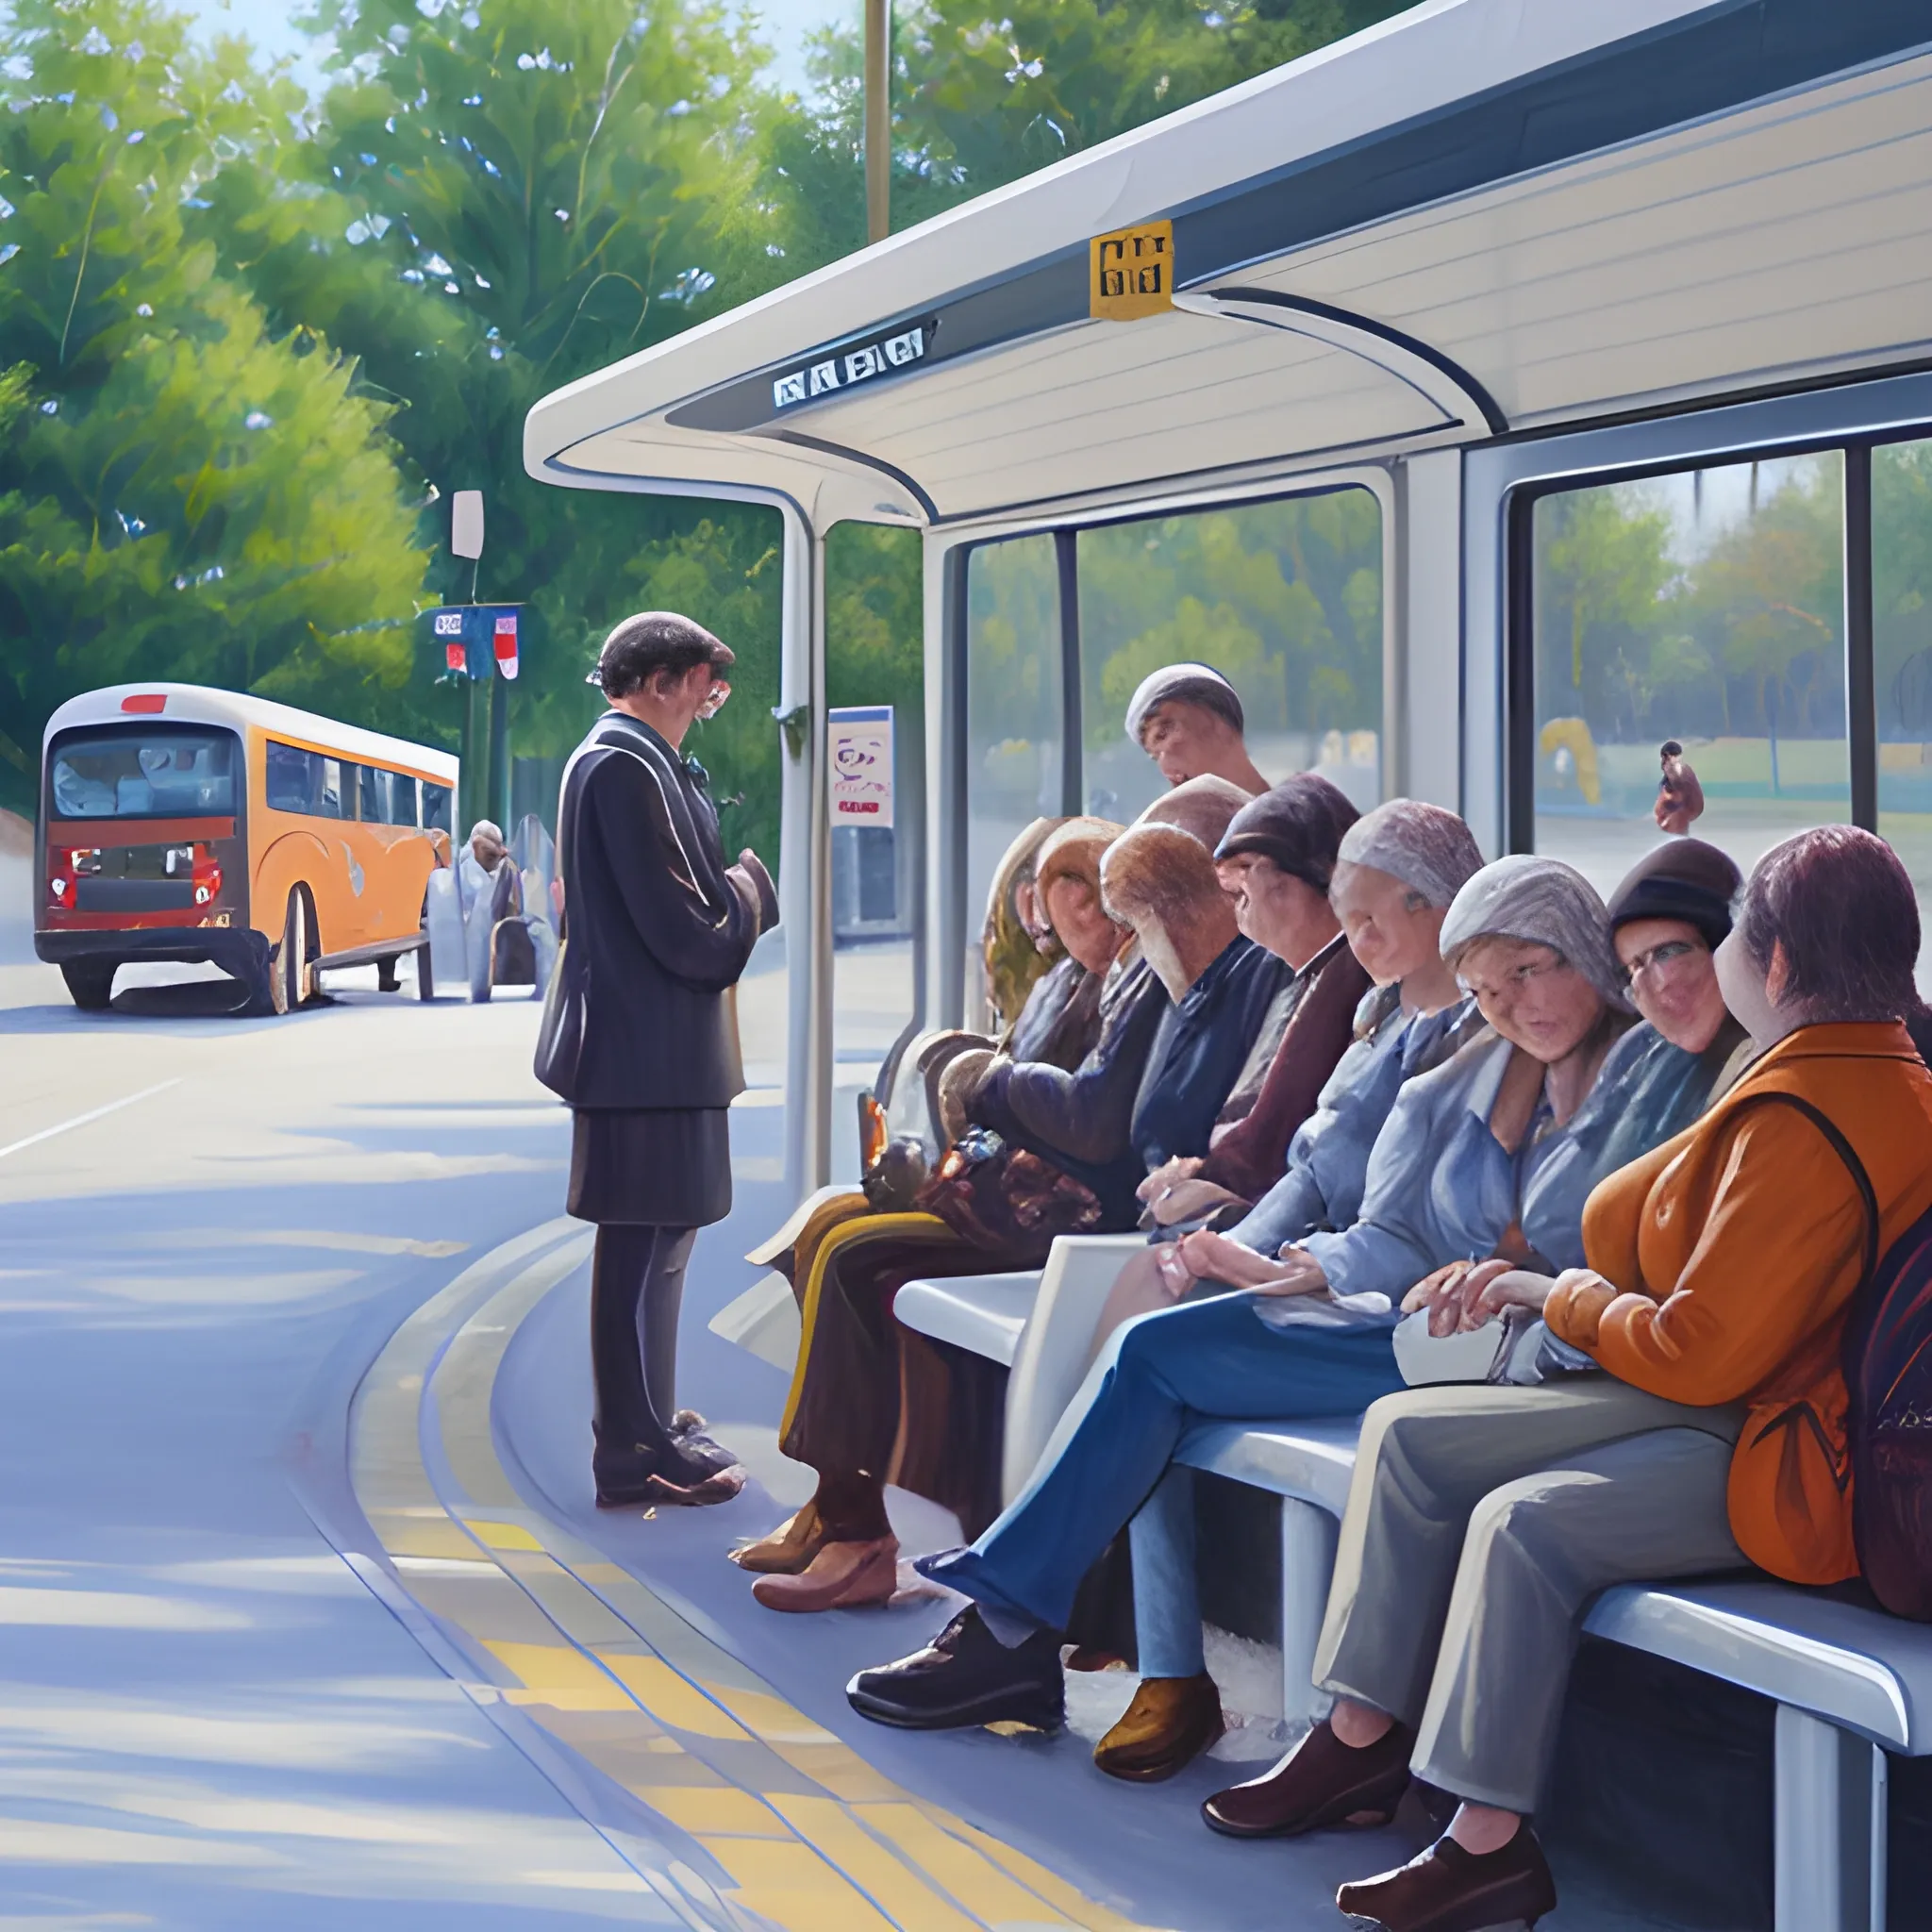 A lot of people are waiting at the bus stop, Oil Painting